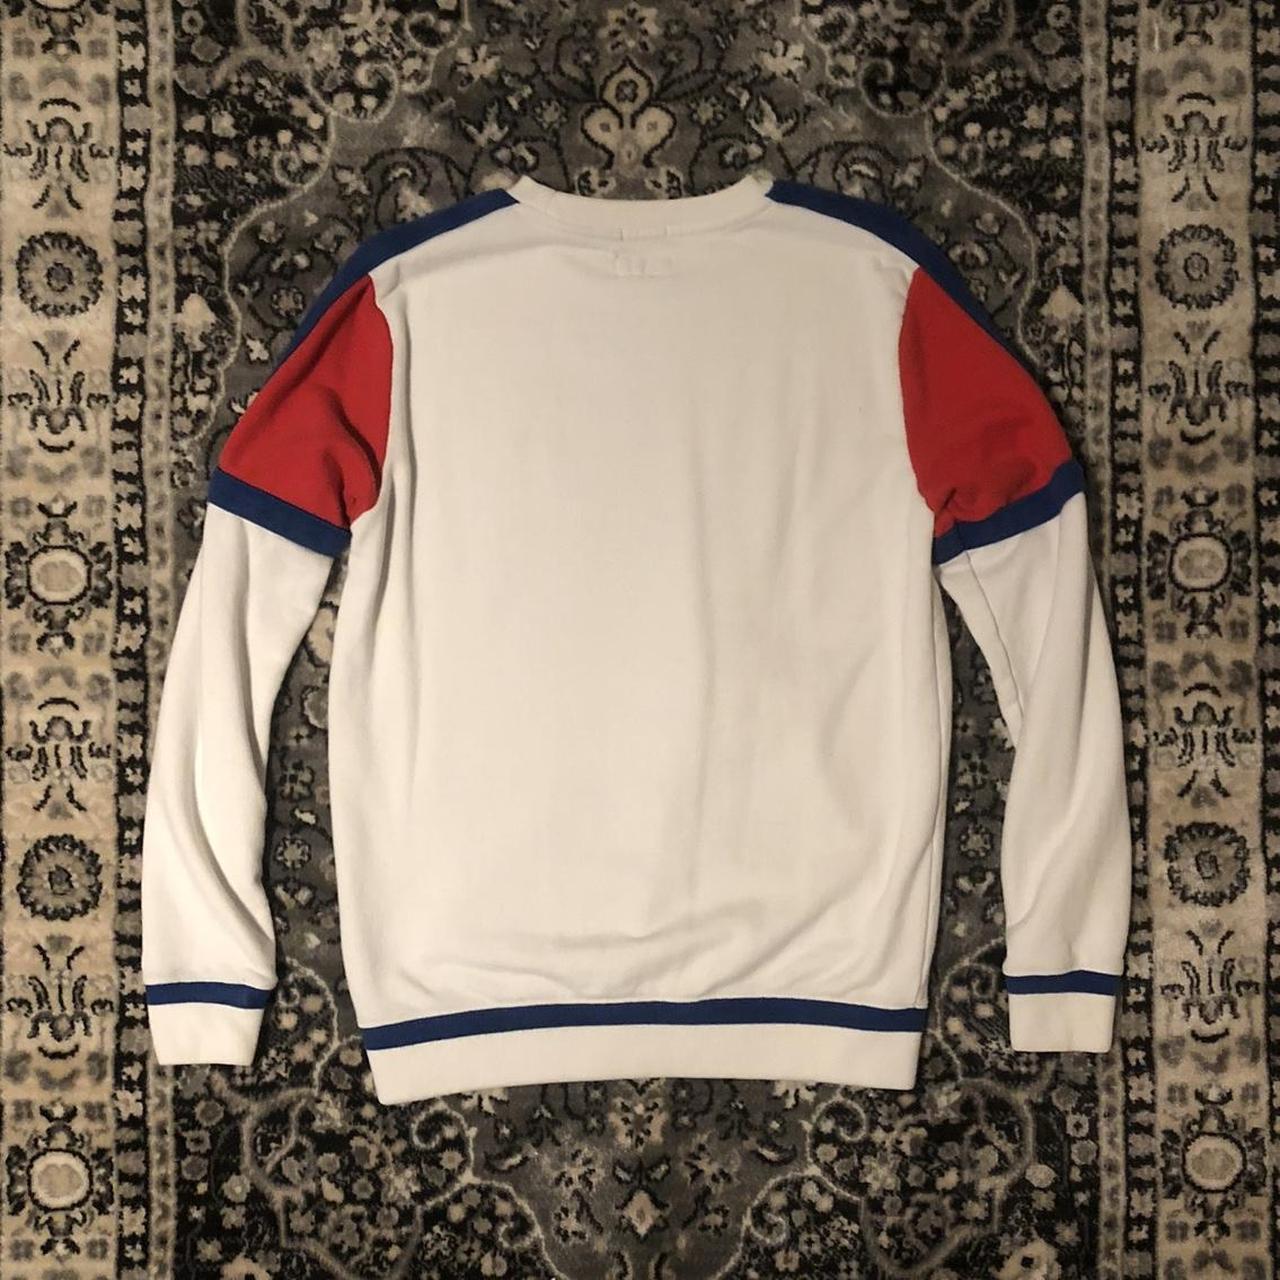 Pepe Jeans Men's White and Blue Hoodie (3)